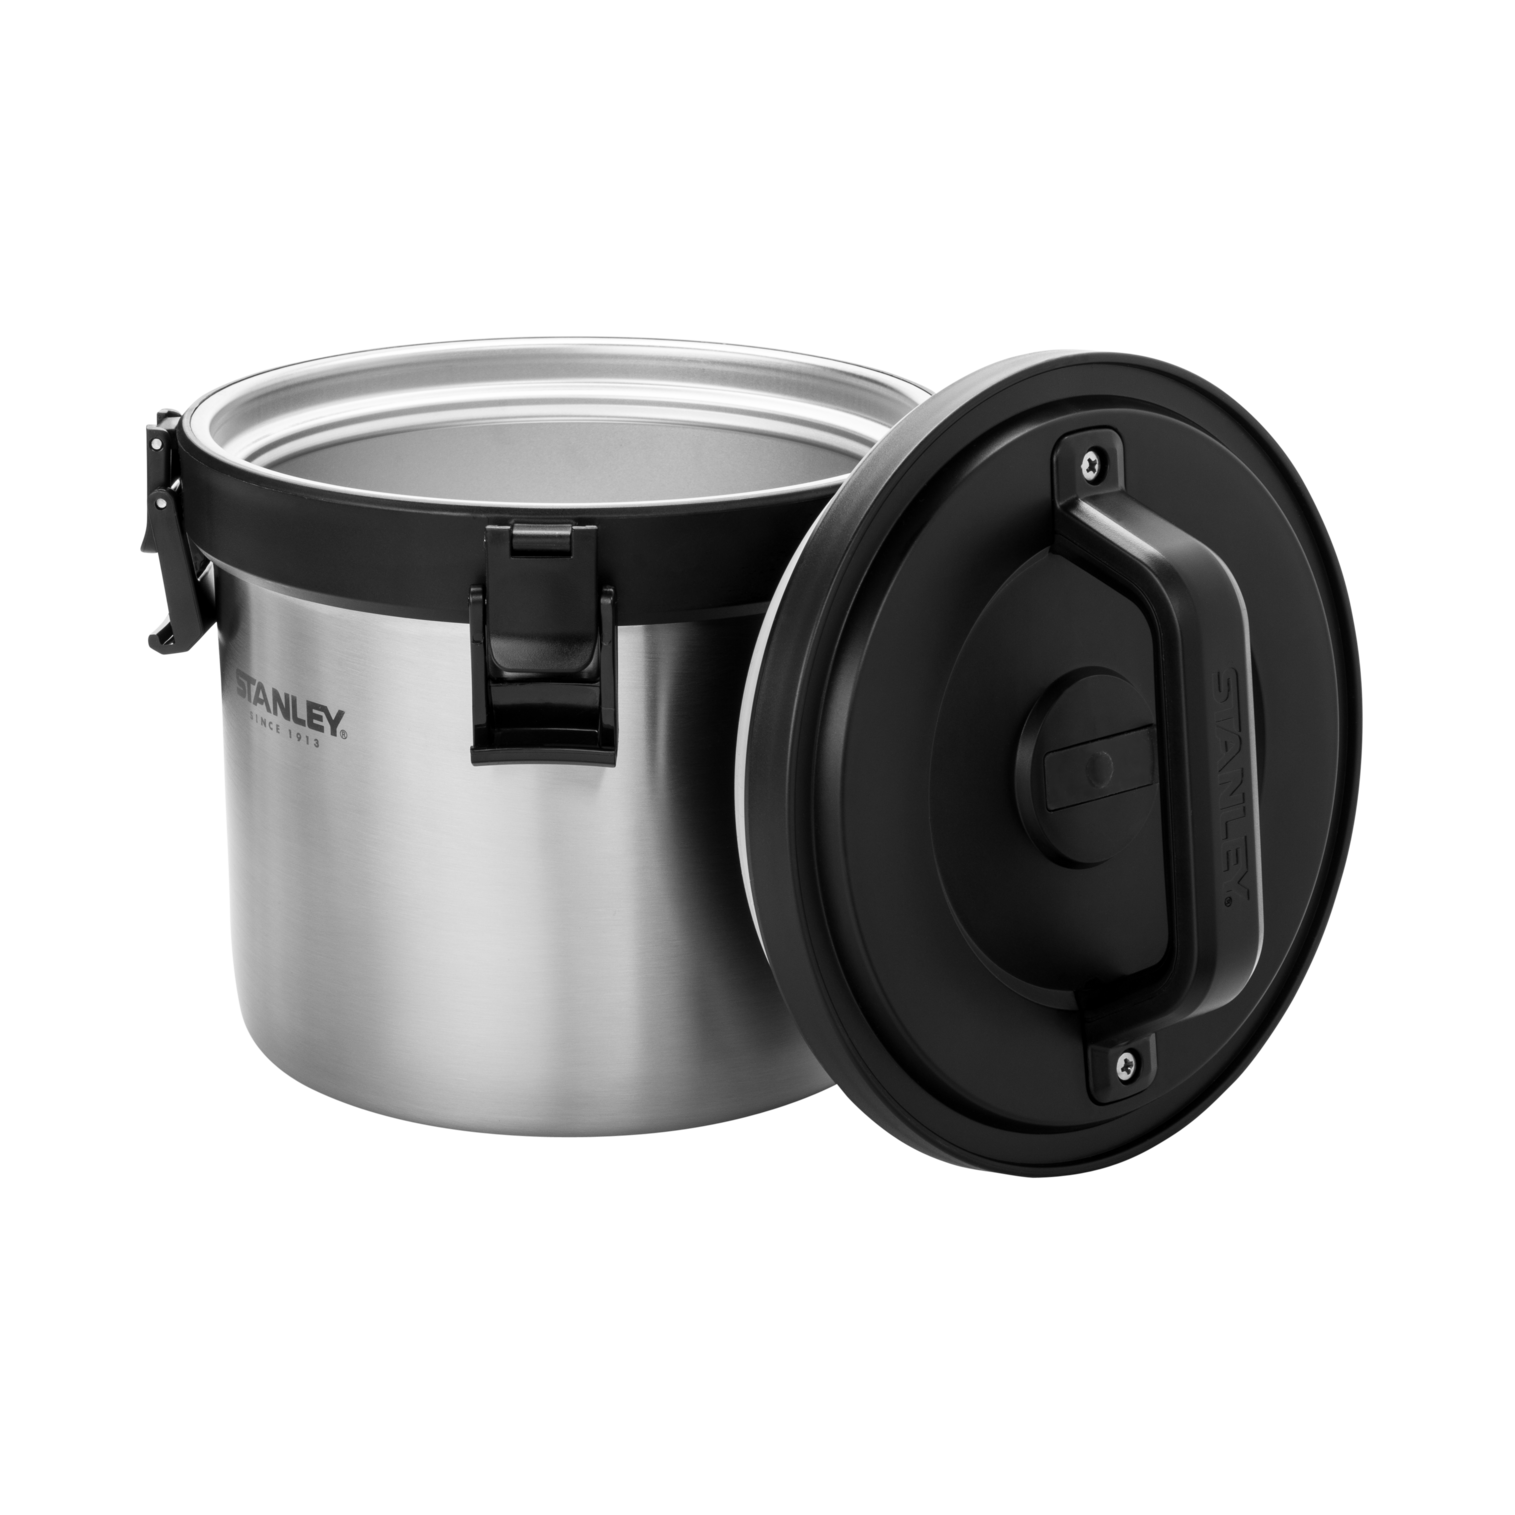 Adventure Stay Hot Camp Crock | 3QT: Stainless